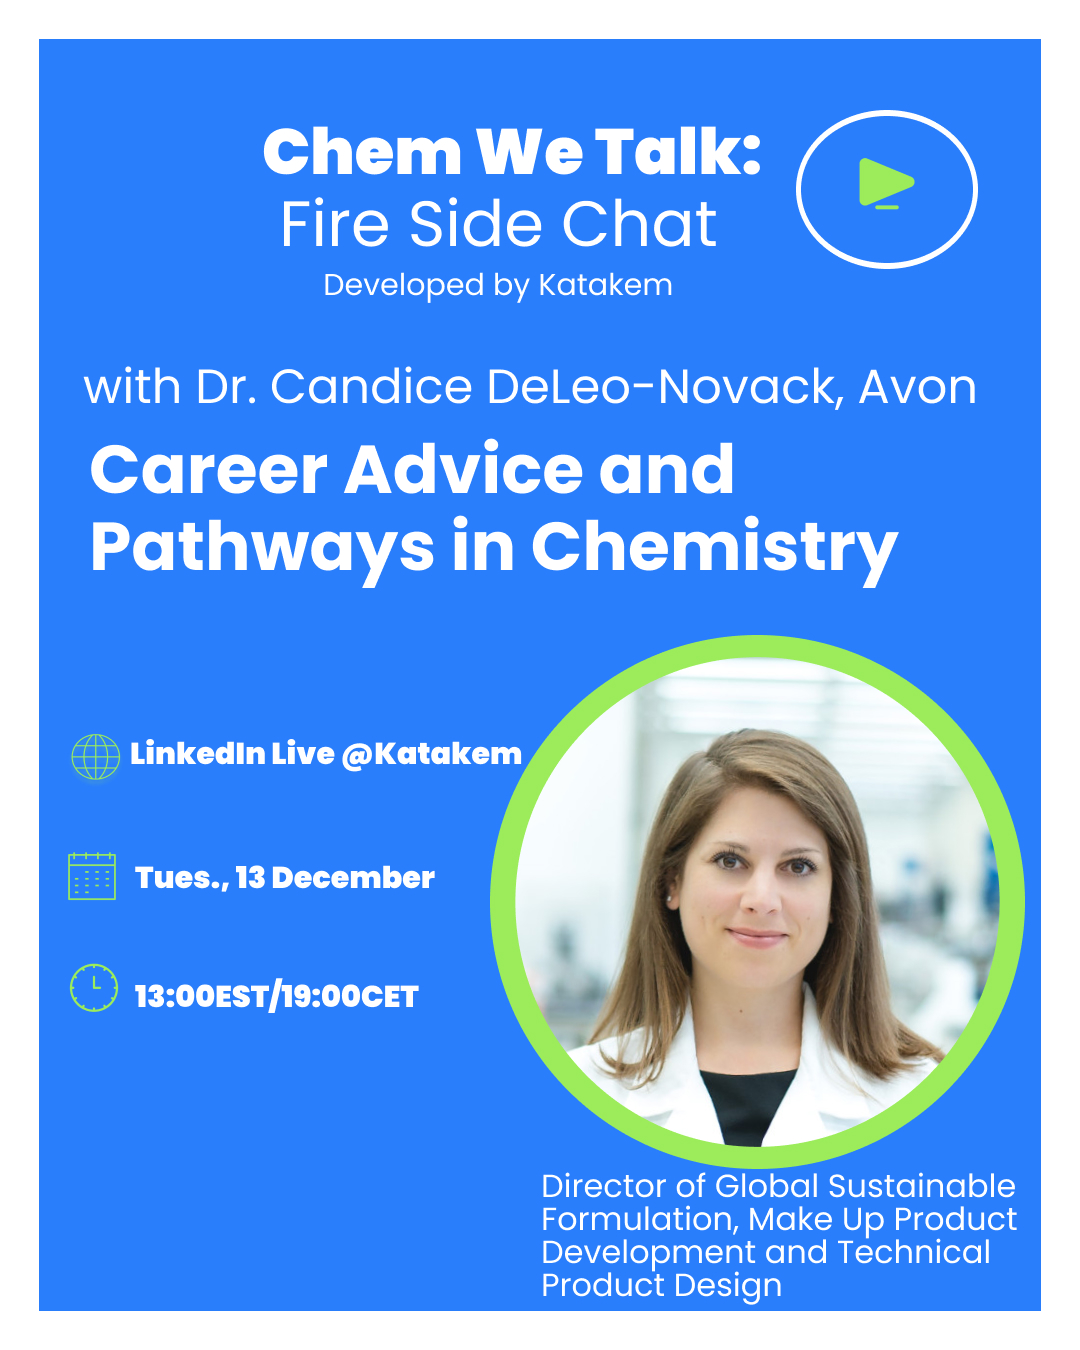 Career Advice and Pathways in Chemistry